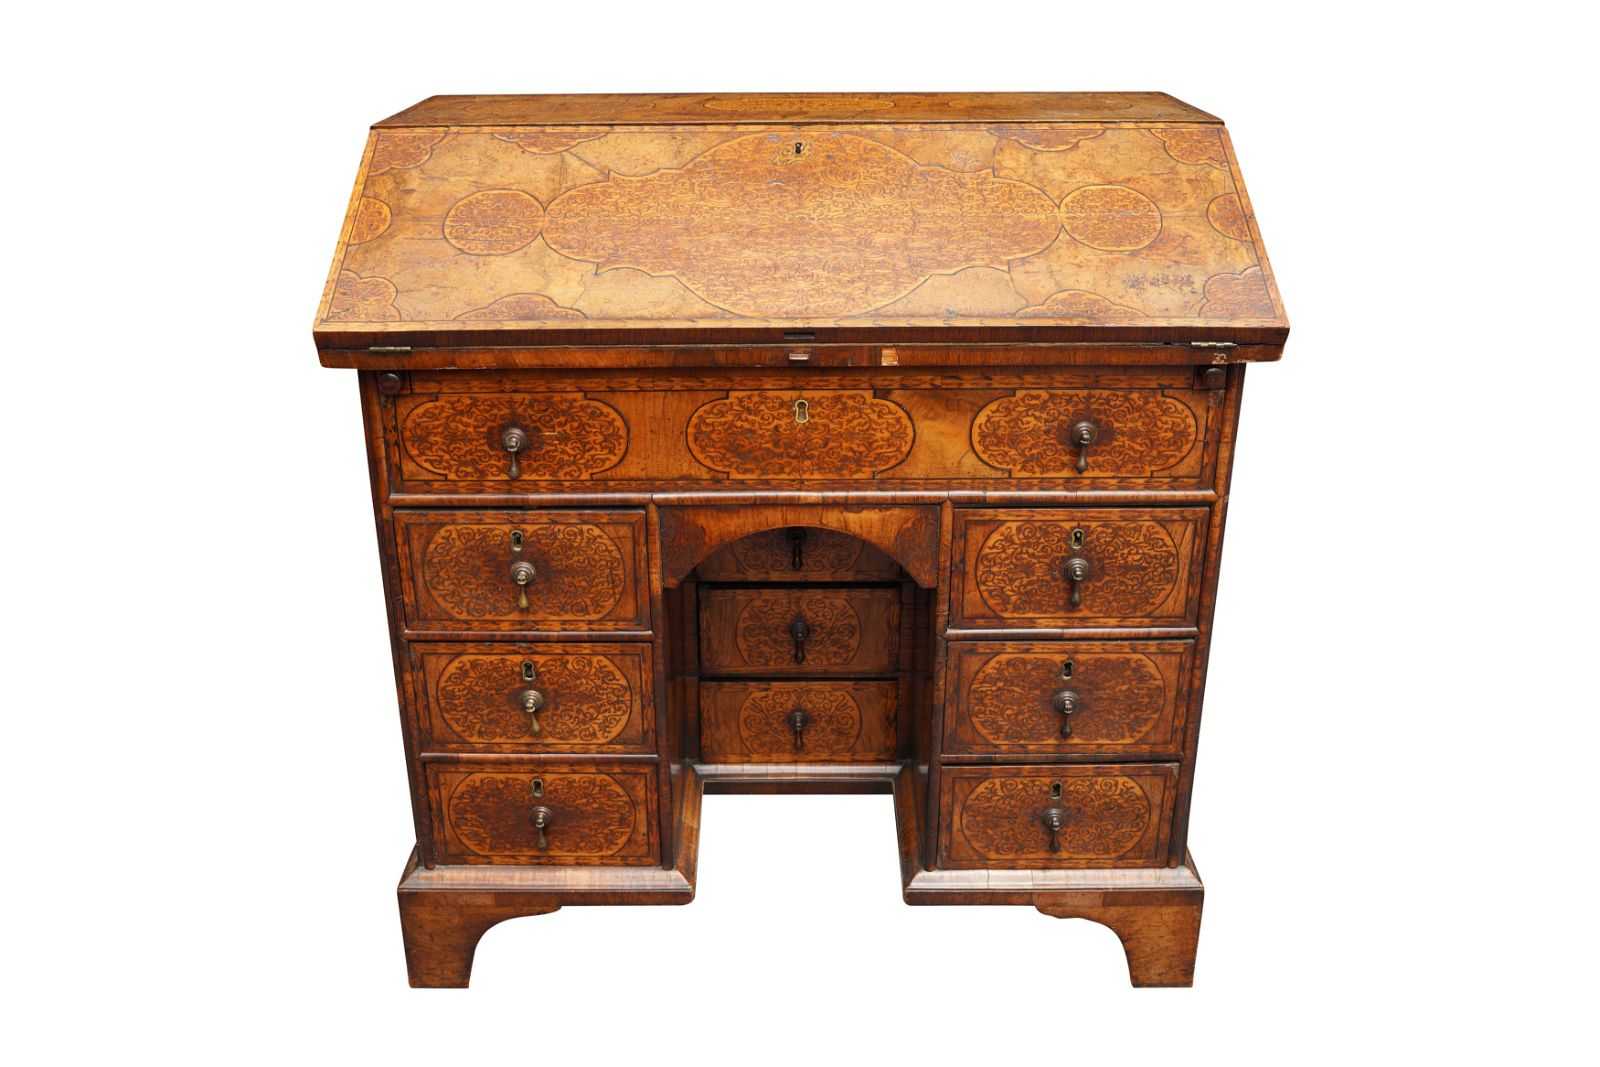 17th-century William and Mary bureau secures $23K at Chiswick